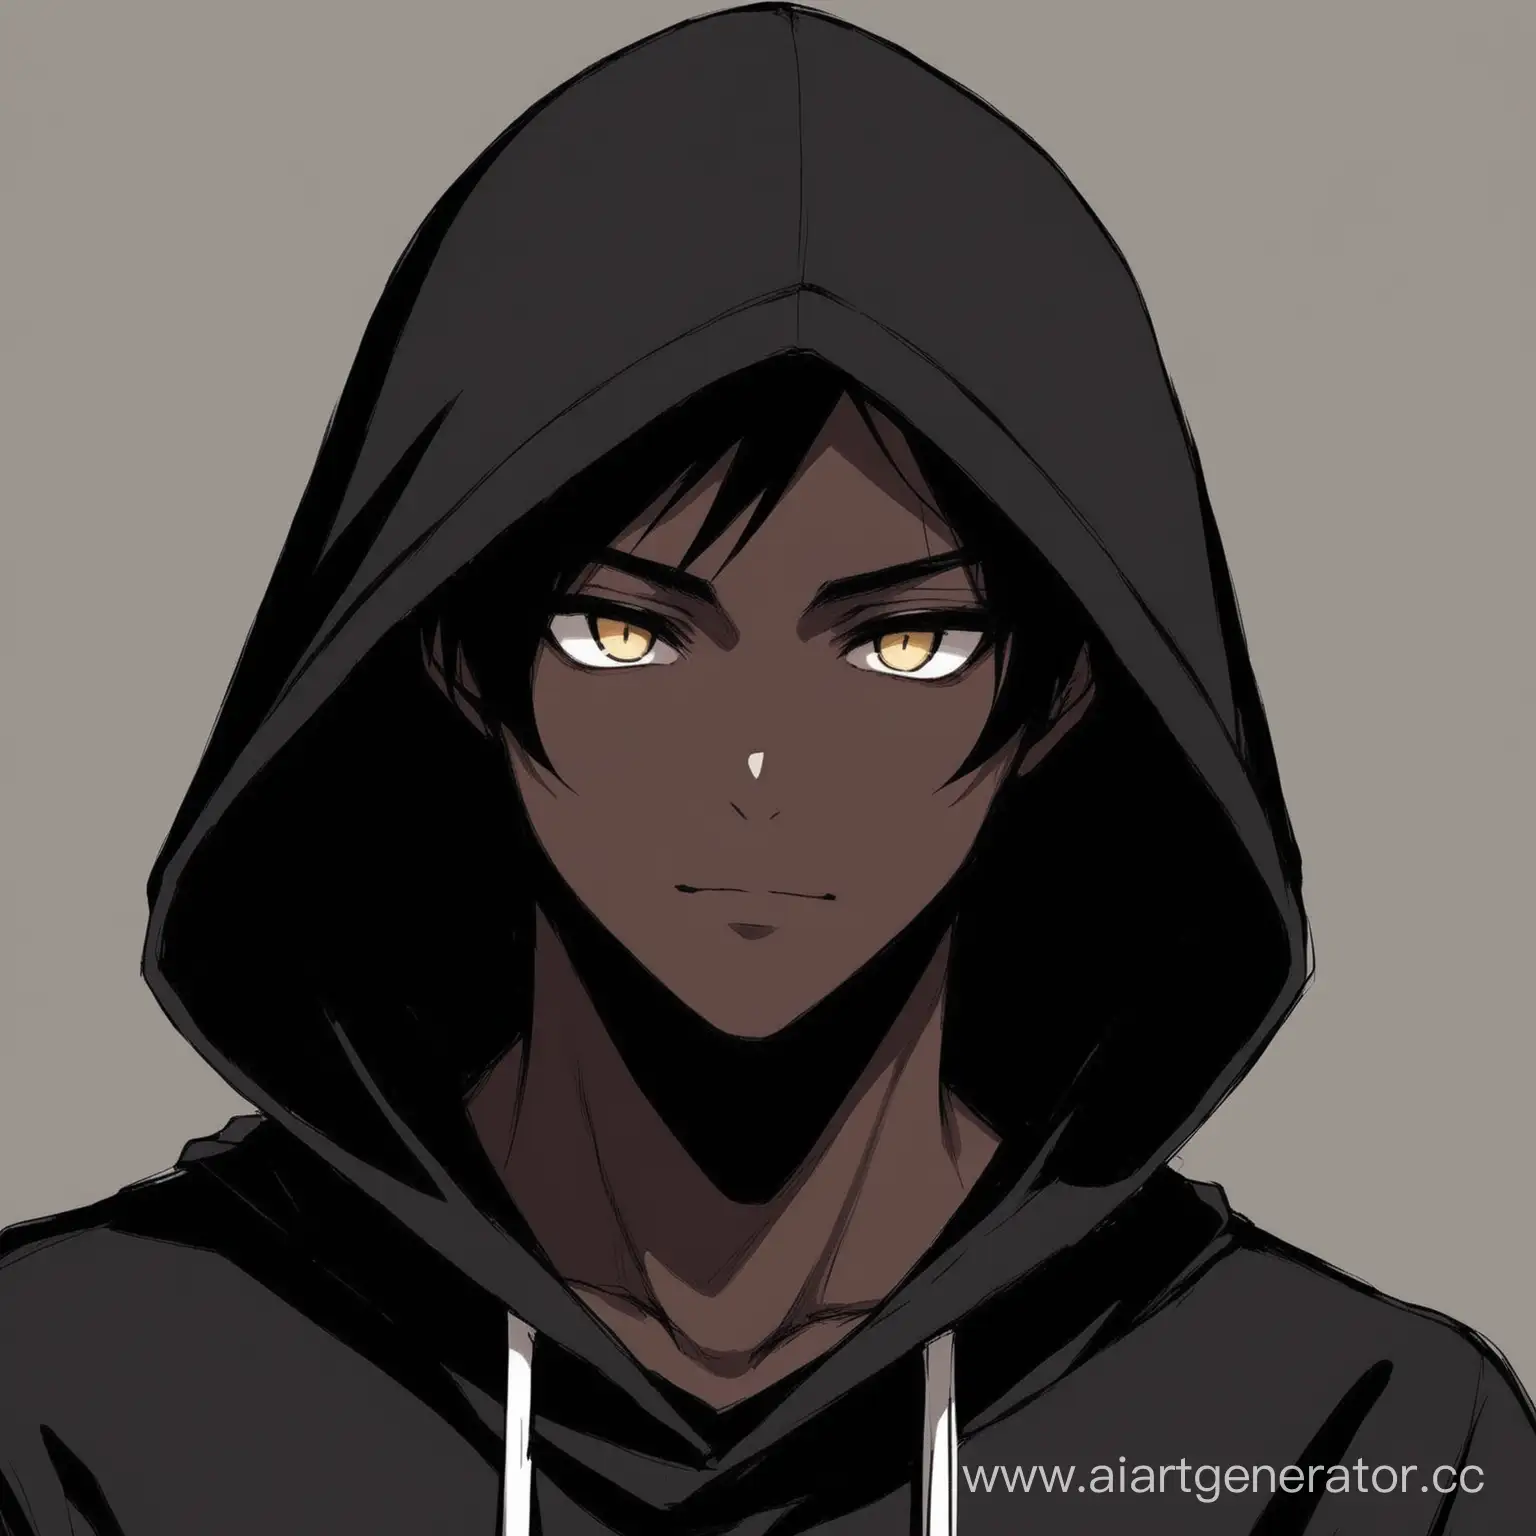 Mysterious-Anime-Character-in-Hooded-Attire